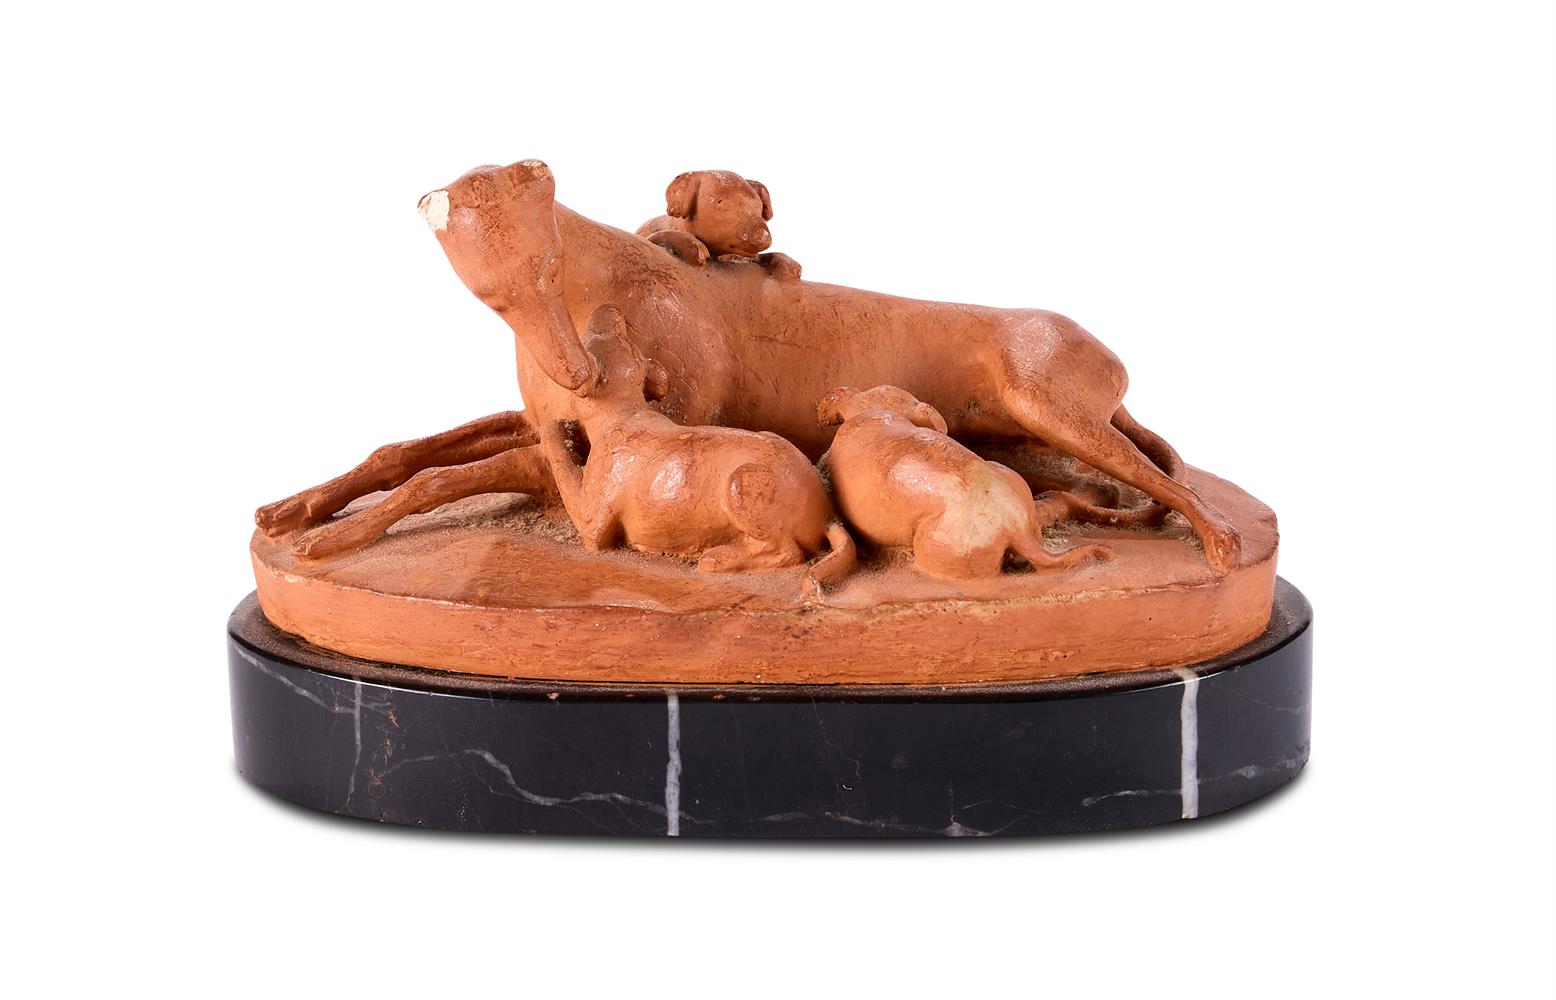 JOSEPH GOTT (BRITISH, 1786-1860) A TERRACOTTA GROUP OF A DOG WITH HER THREE YOUNG PUPPIES